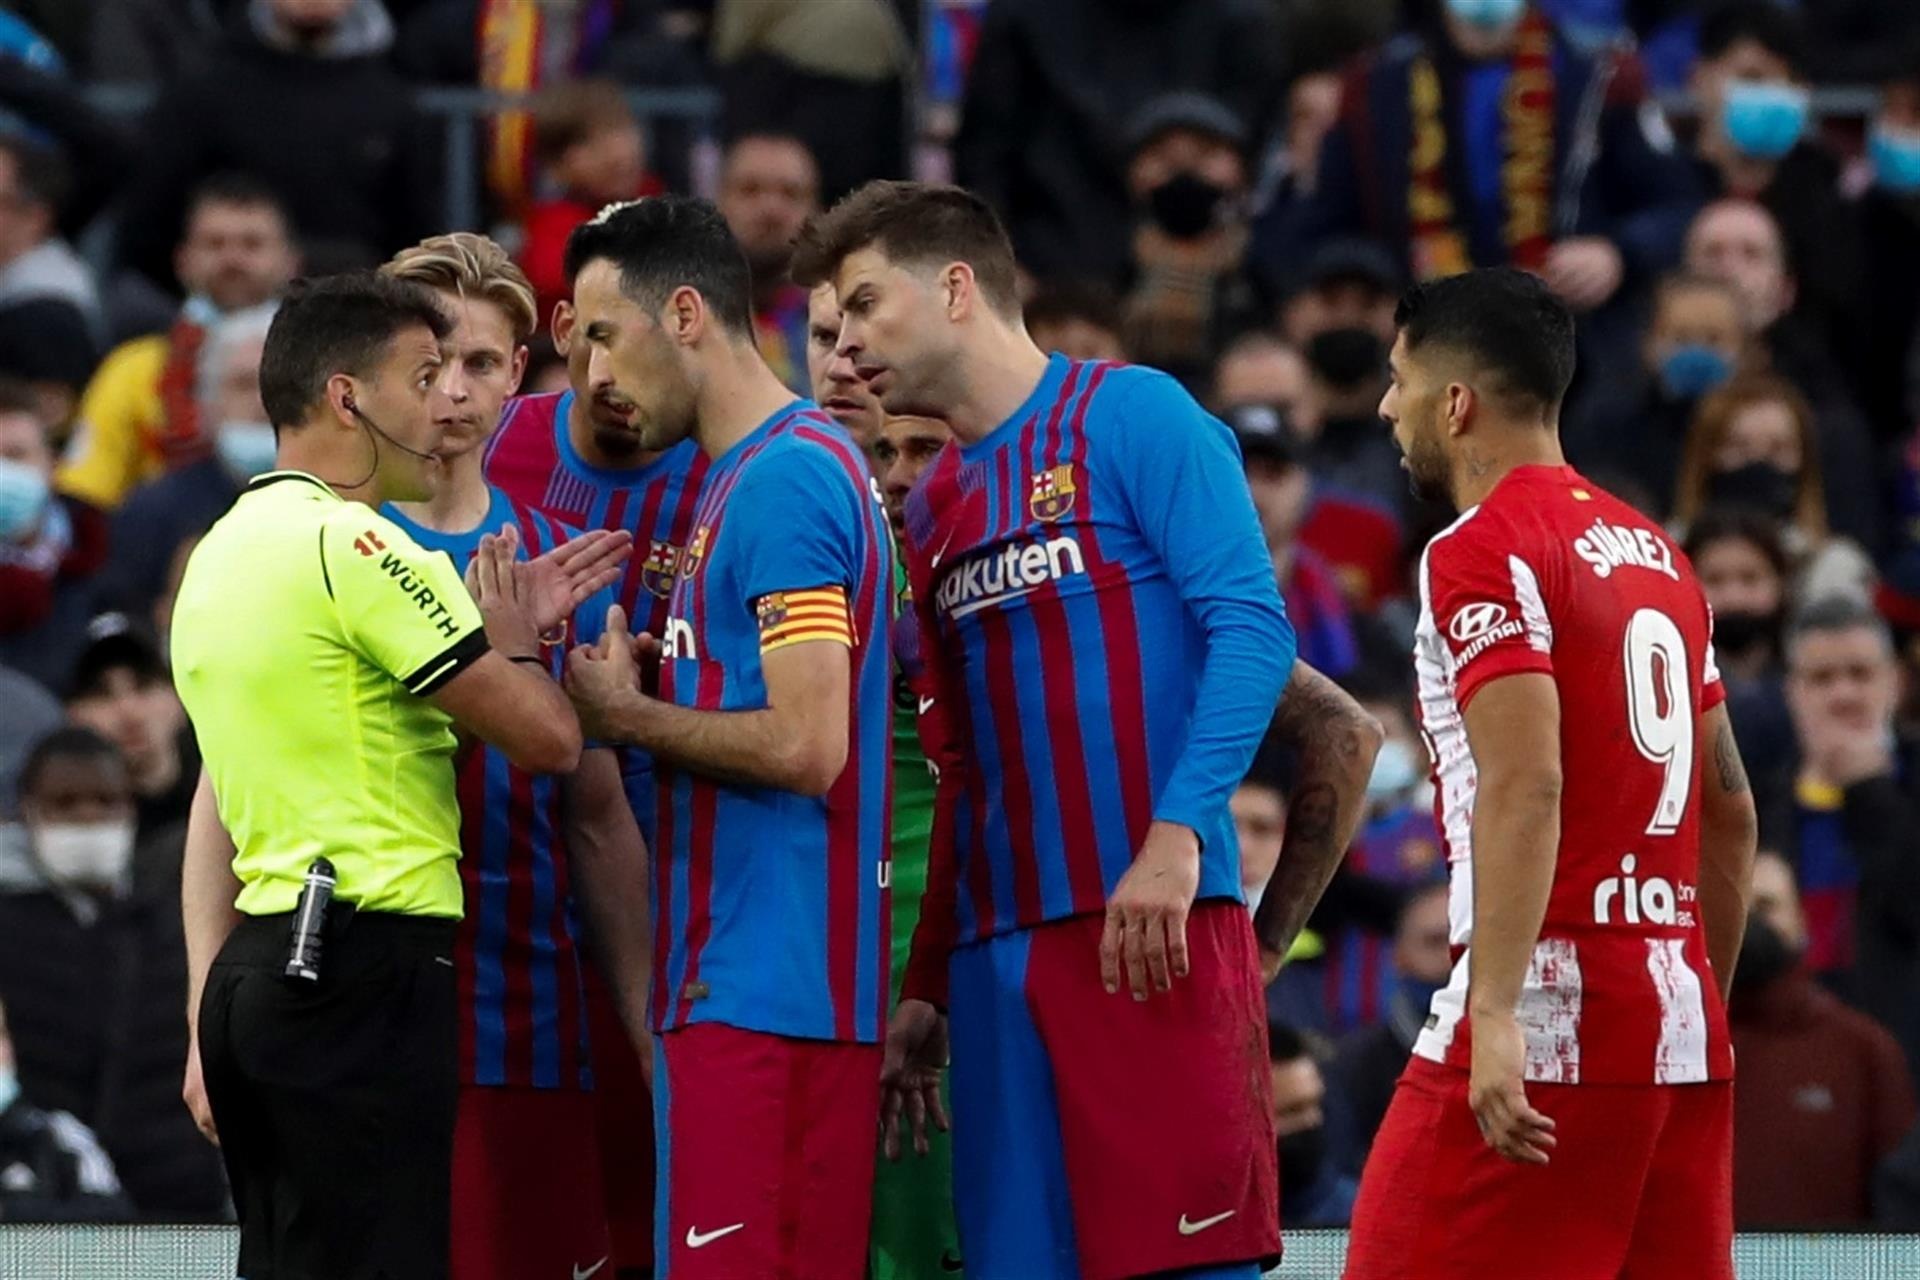 Who is Jesús Gil Manzano, the referee for Barcelona vs Real Madrid